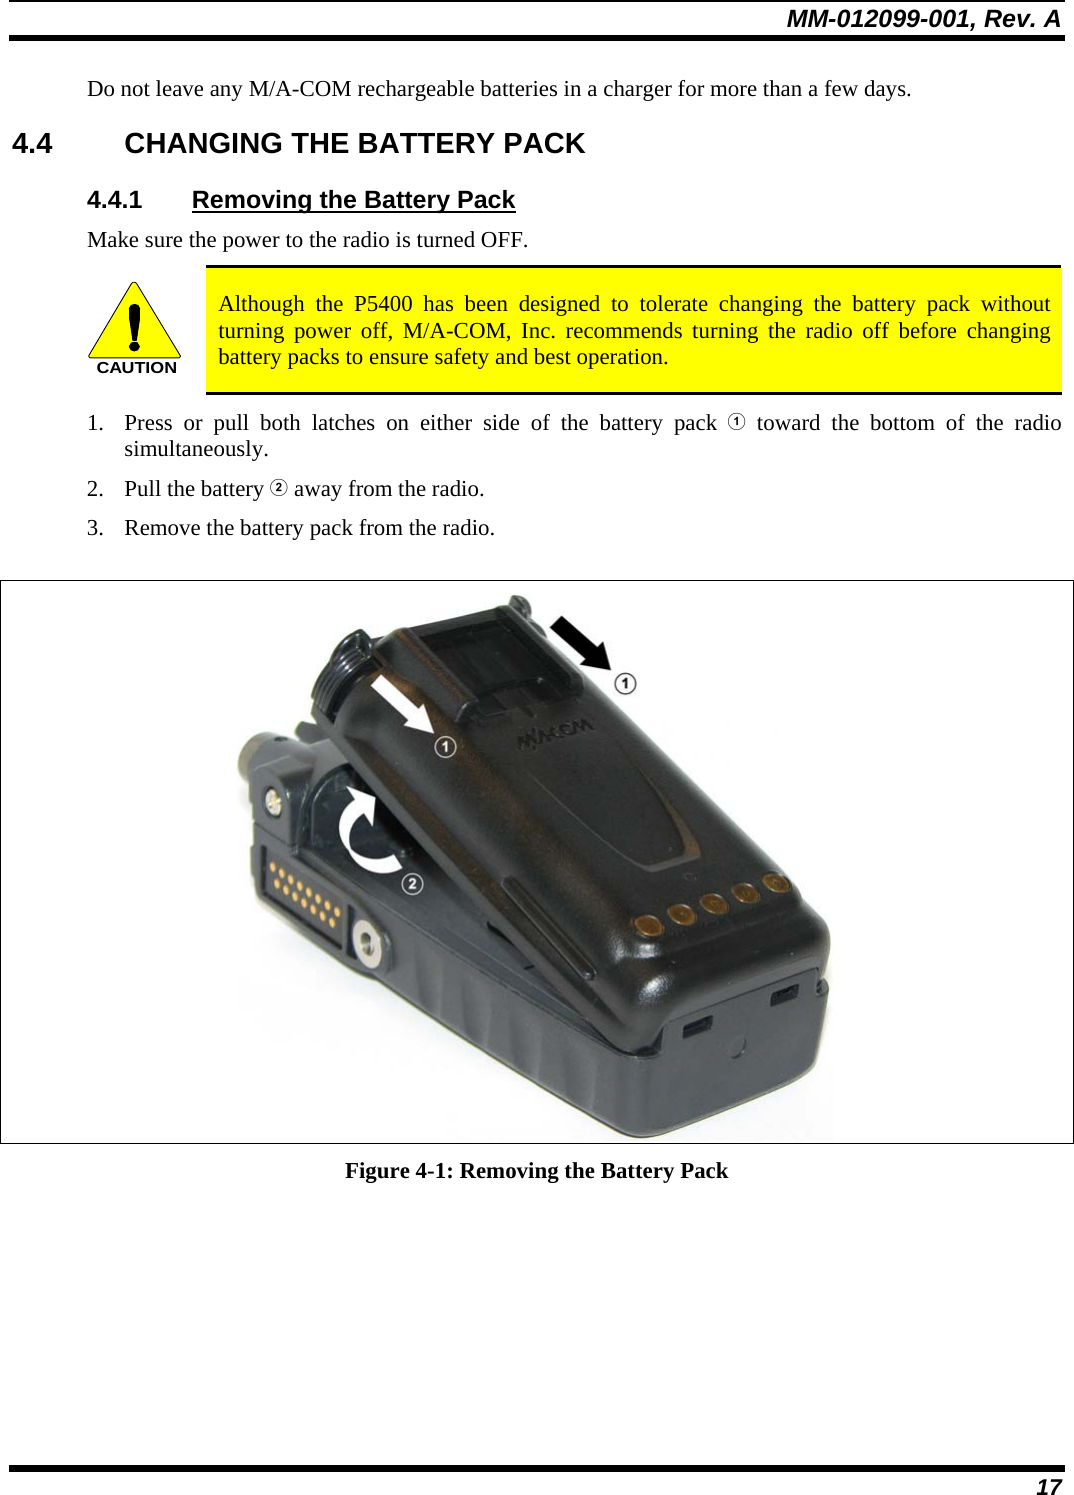 MM-012099-001, Rev. A 17 Do not leave any M/A-COM rechargeable batteries in a charger for more than a few days.  4.4  CHANGING THE BATTERY PACK 4.4.1  Removing the Battery Pack Make sure the power to the radio is turned OFF. CAUTION Although the P5400 has been designed to tolerate changing the battery pack without turning power off, M/A-COM, Inc. recommends turning the radio off before changing battery packs to ensure safety and best operation. 1. Press or pull both latches on either side of the battery pack  toward the bottom of the radio simultaneously.  2. Pull the battery  away from the radio. 3. Remove the battery pack from the radio.   Figure 4-1: Removing the Battery Pack 